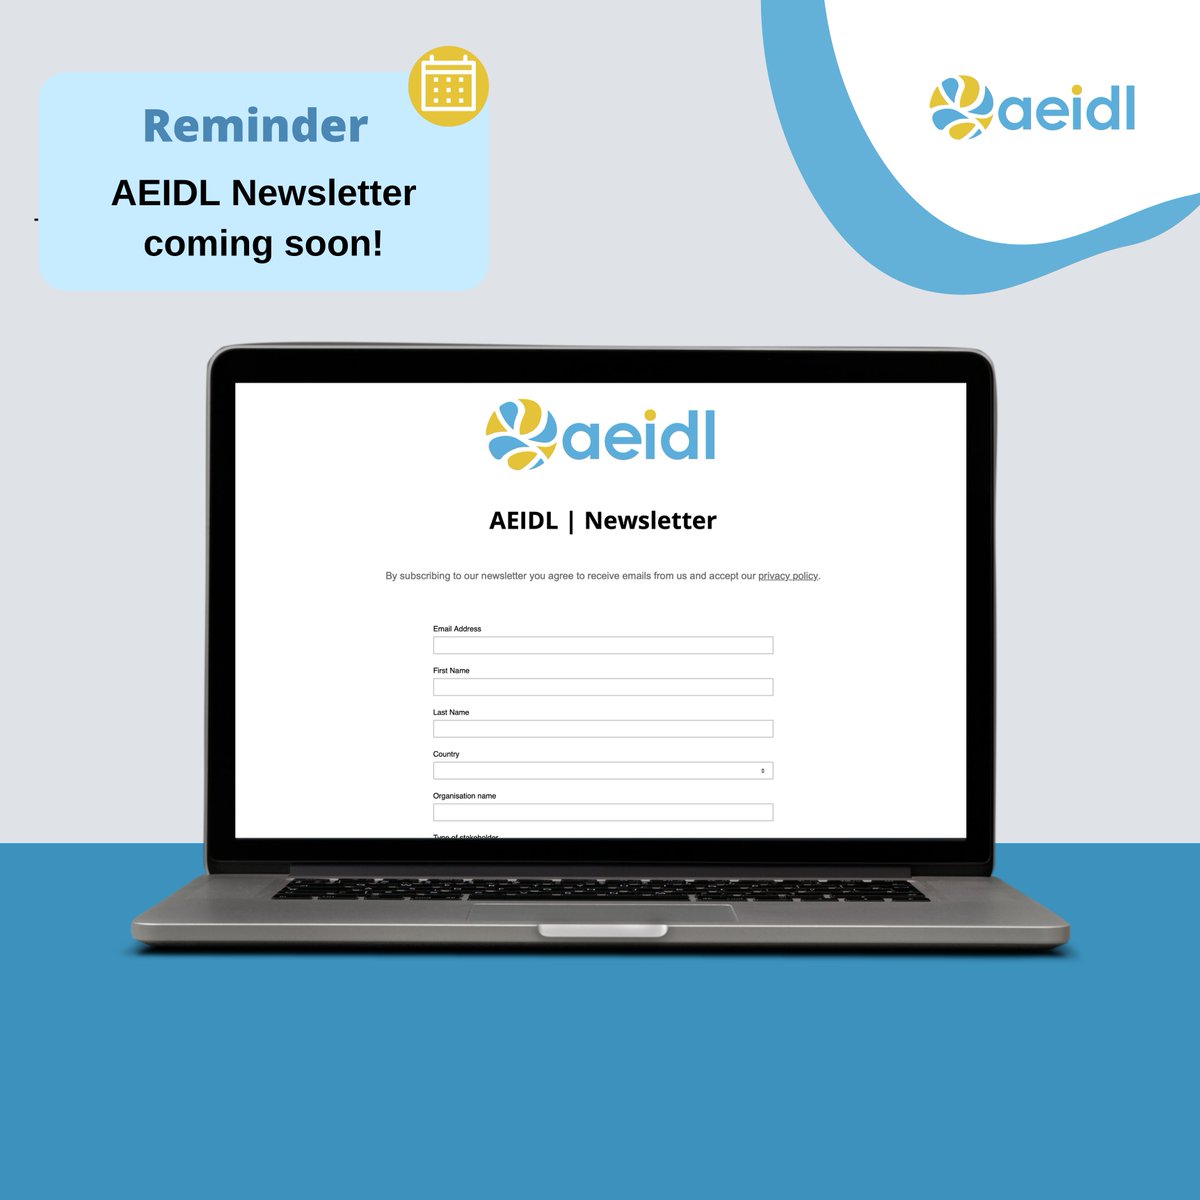 🌟 Exciting news for our #AEIDL Community! 🚀 Our April newsletter is coming soon. Subscribe now to receive the #AEIDLNewsletter in your inbox! 📥 👉 bit.ly/49N0TUv 🌍 Stay informed! 💌 #AEIDLNewsletter